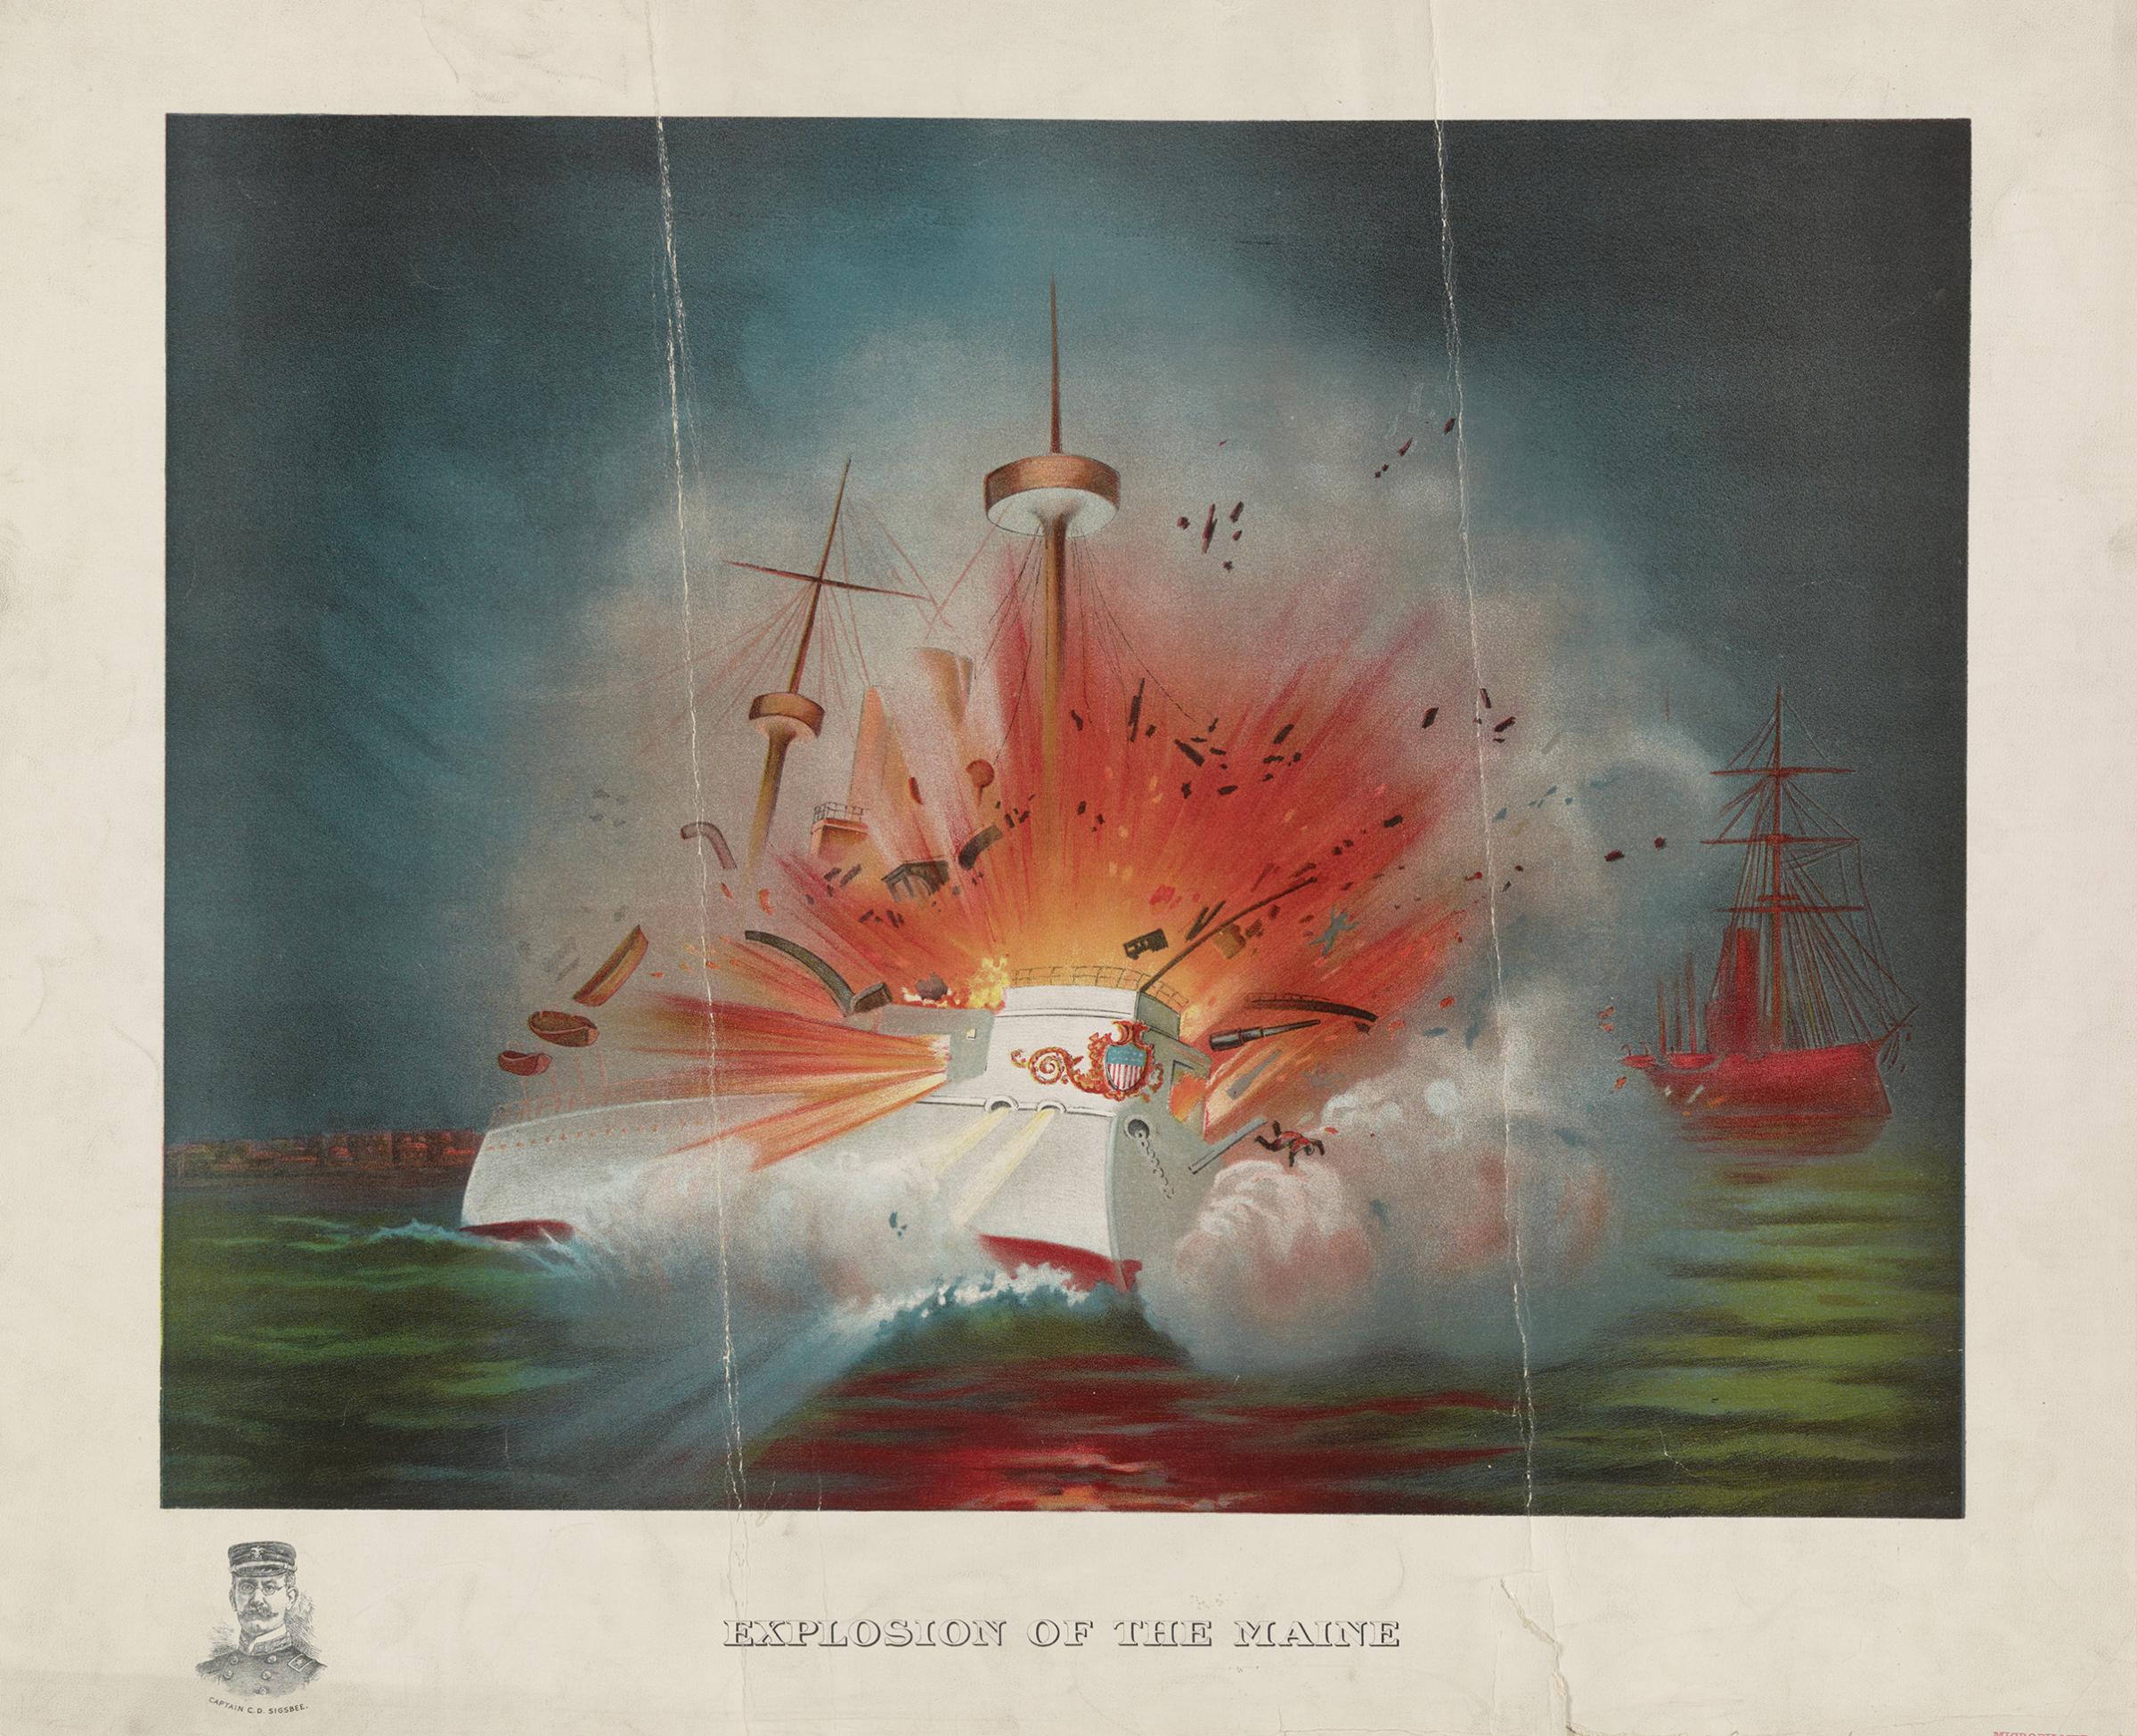 Explosion of the Maine, 1898.